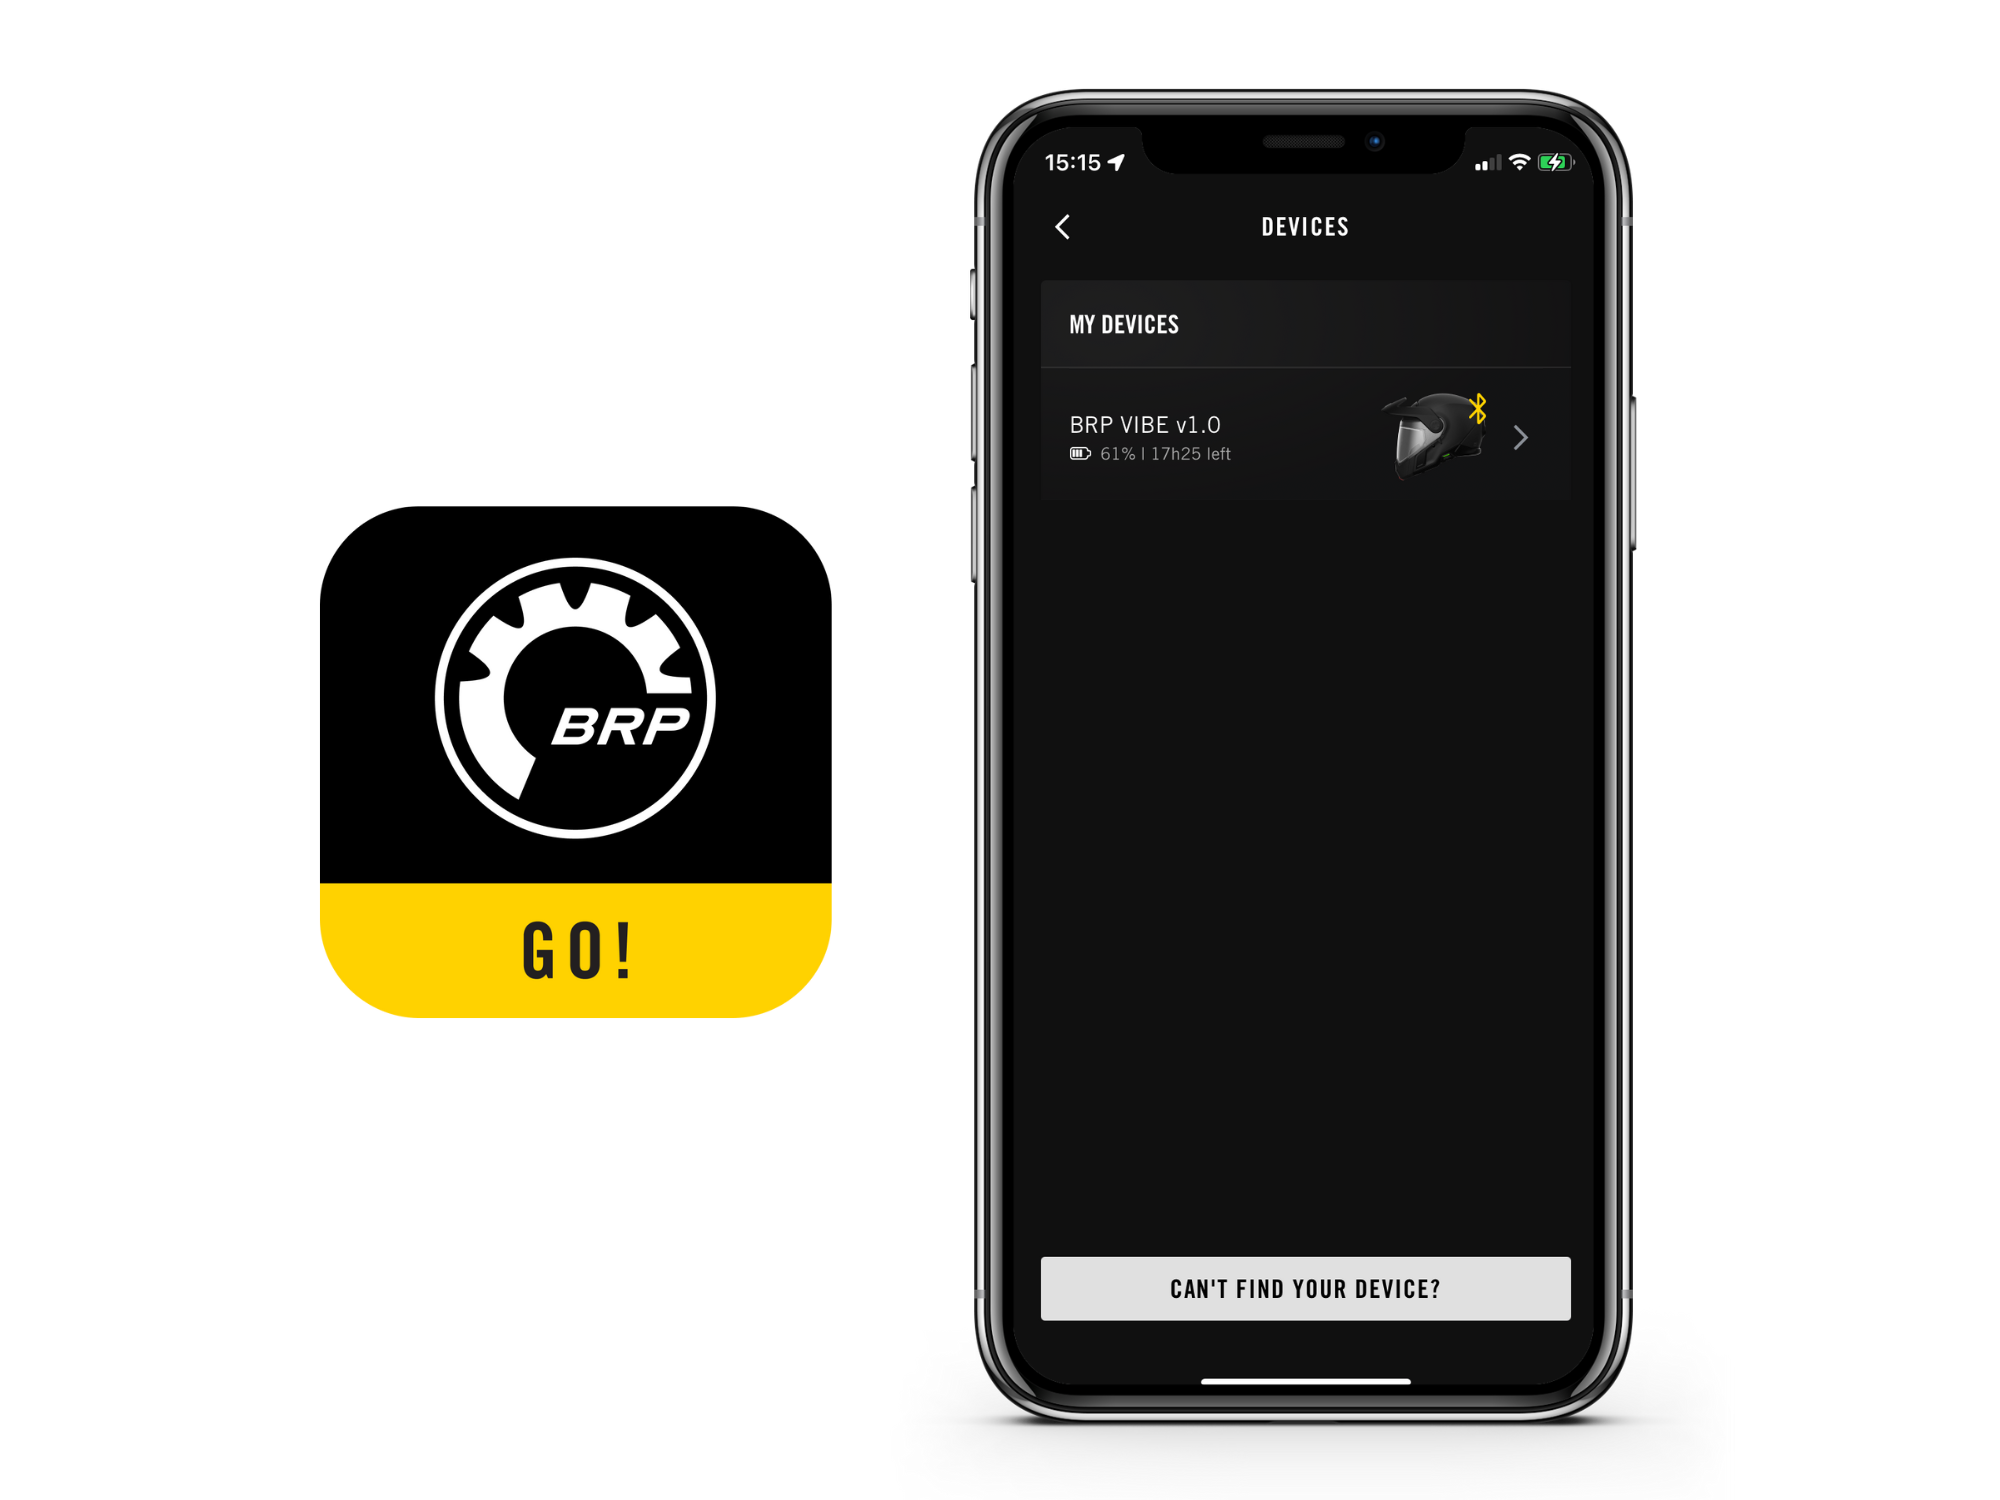 The BRP GO! app showing the Devices screen for Vibe communication system